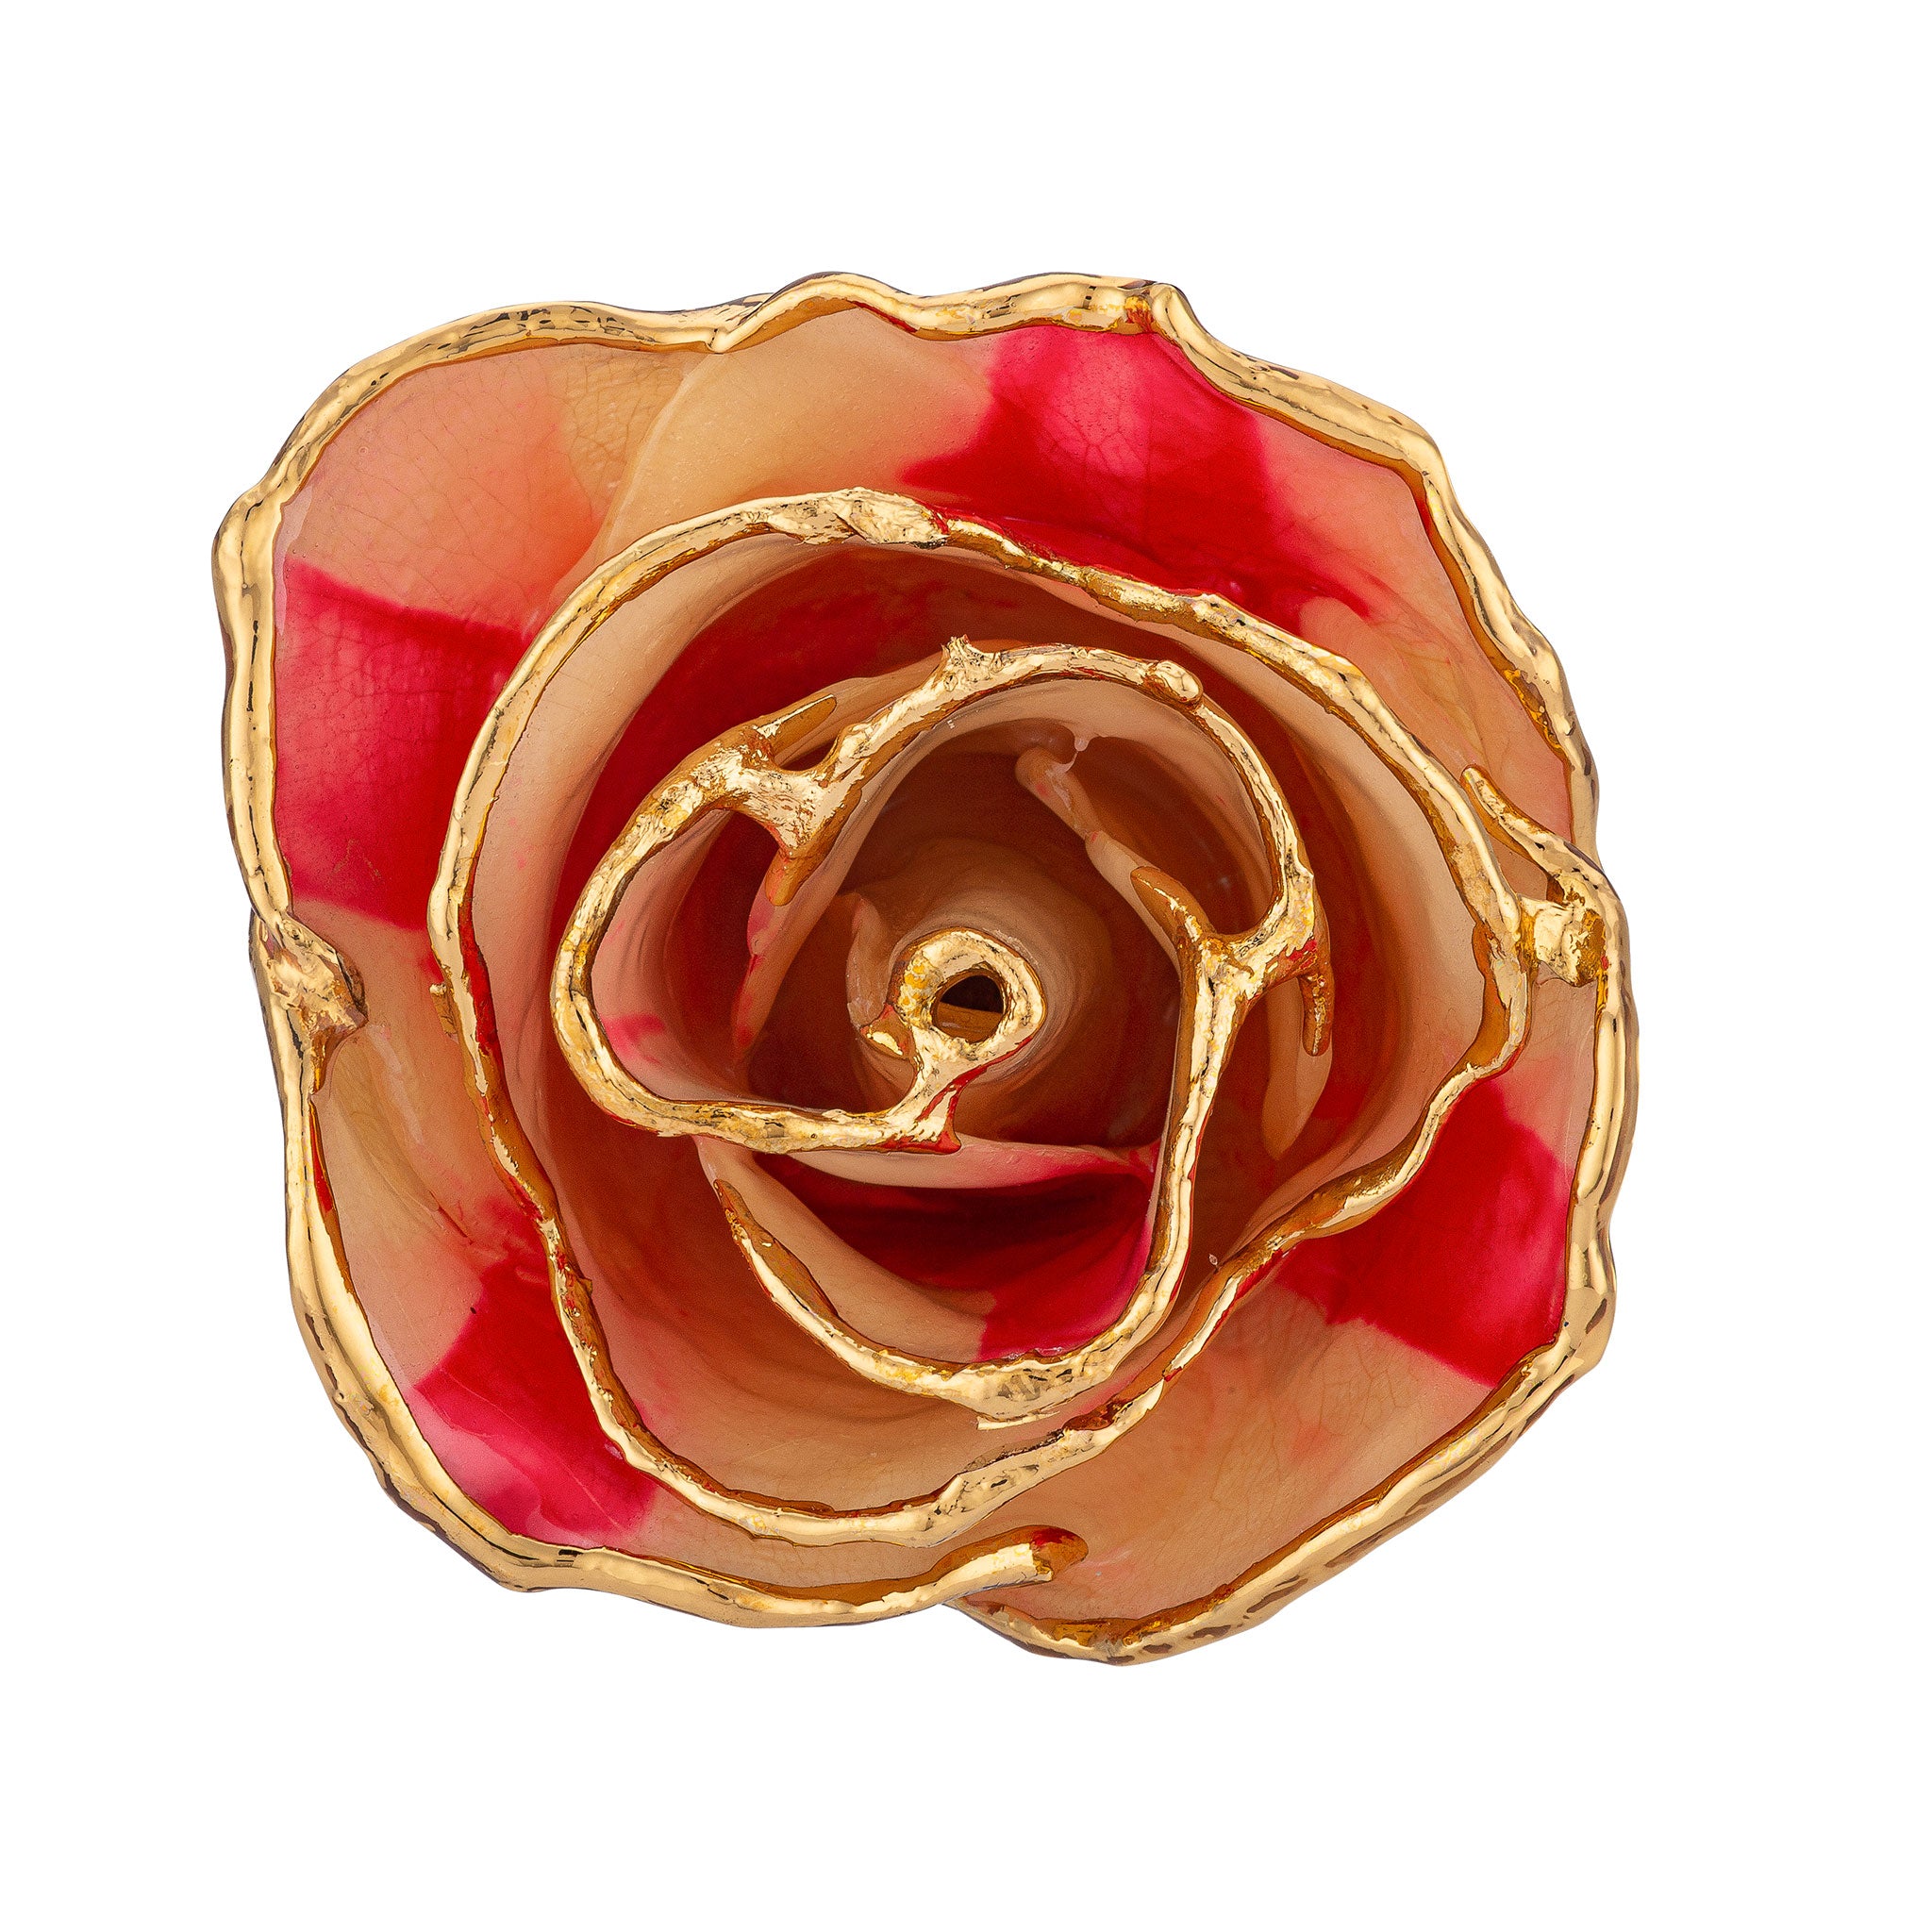 24K Gold Trimmed Forever Rose with Peppermint Striped Petals. View of Stem, Leaves, and Rose Petals and Showing Detail of Gold Trim view from top